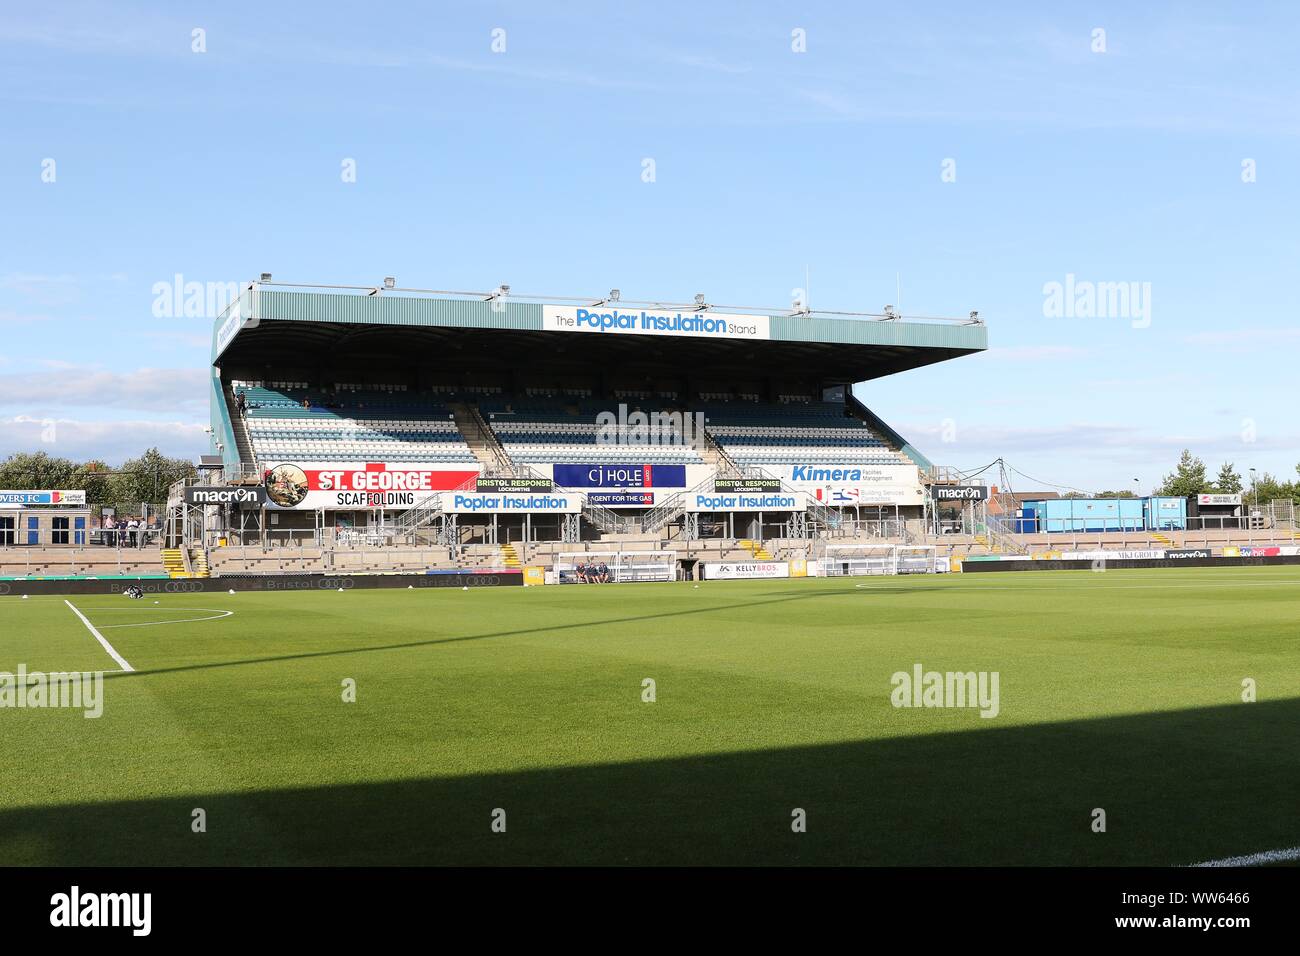 Bristol Rovers FC v Cheltenham Town FC  at  (EFL Carabao Cup 1st Round - 13 August 2019) - The Mem  Picture by Antony Thompson - Thousand Word Media, Stock Photo